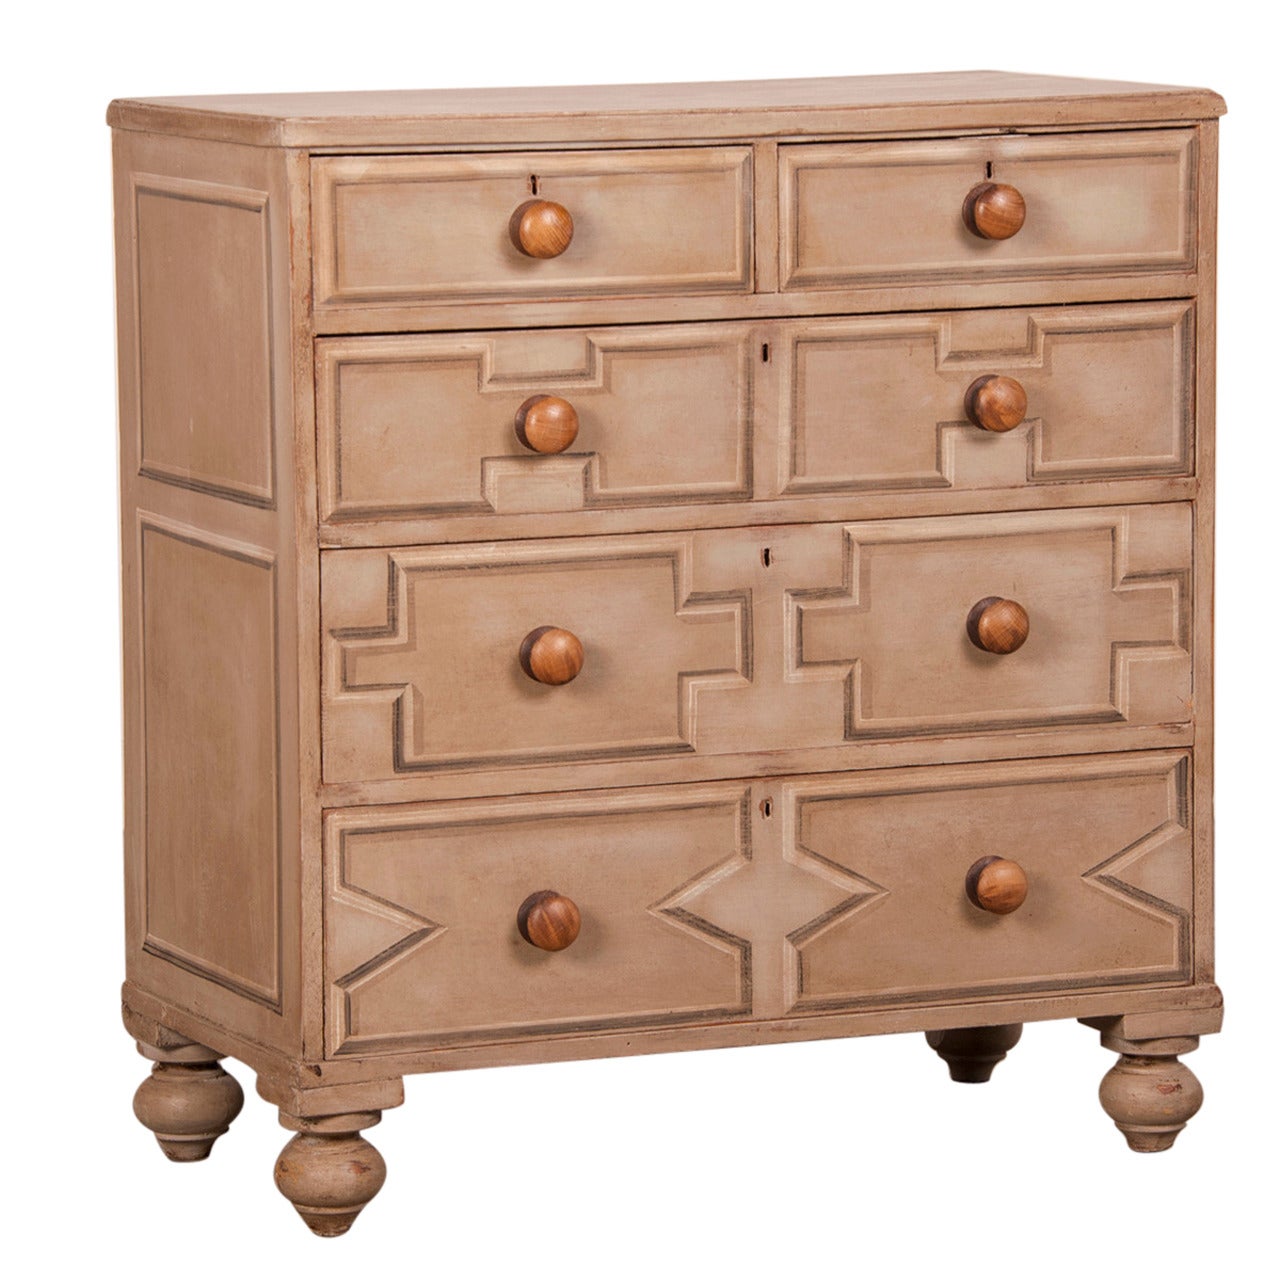 Five Drawer Pine Chest, England circa1865, Painted Geometric Pattern